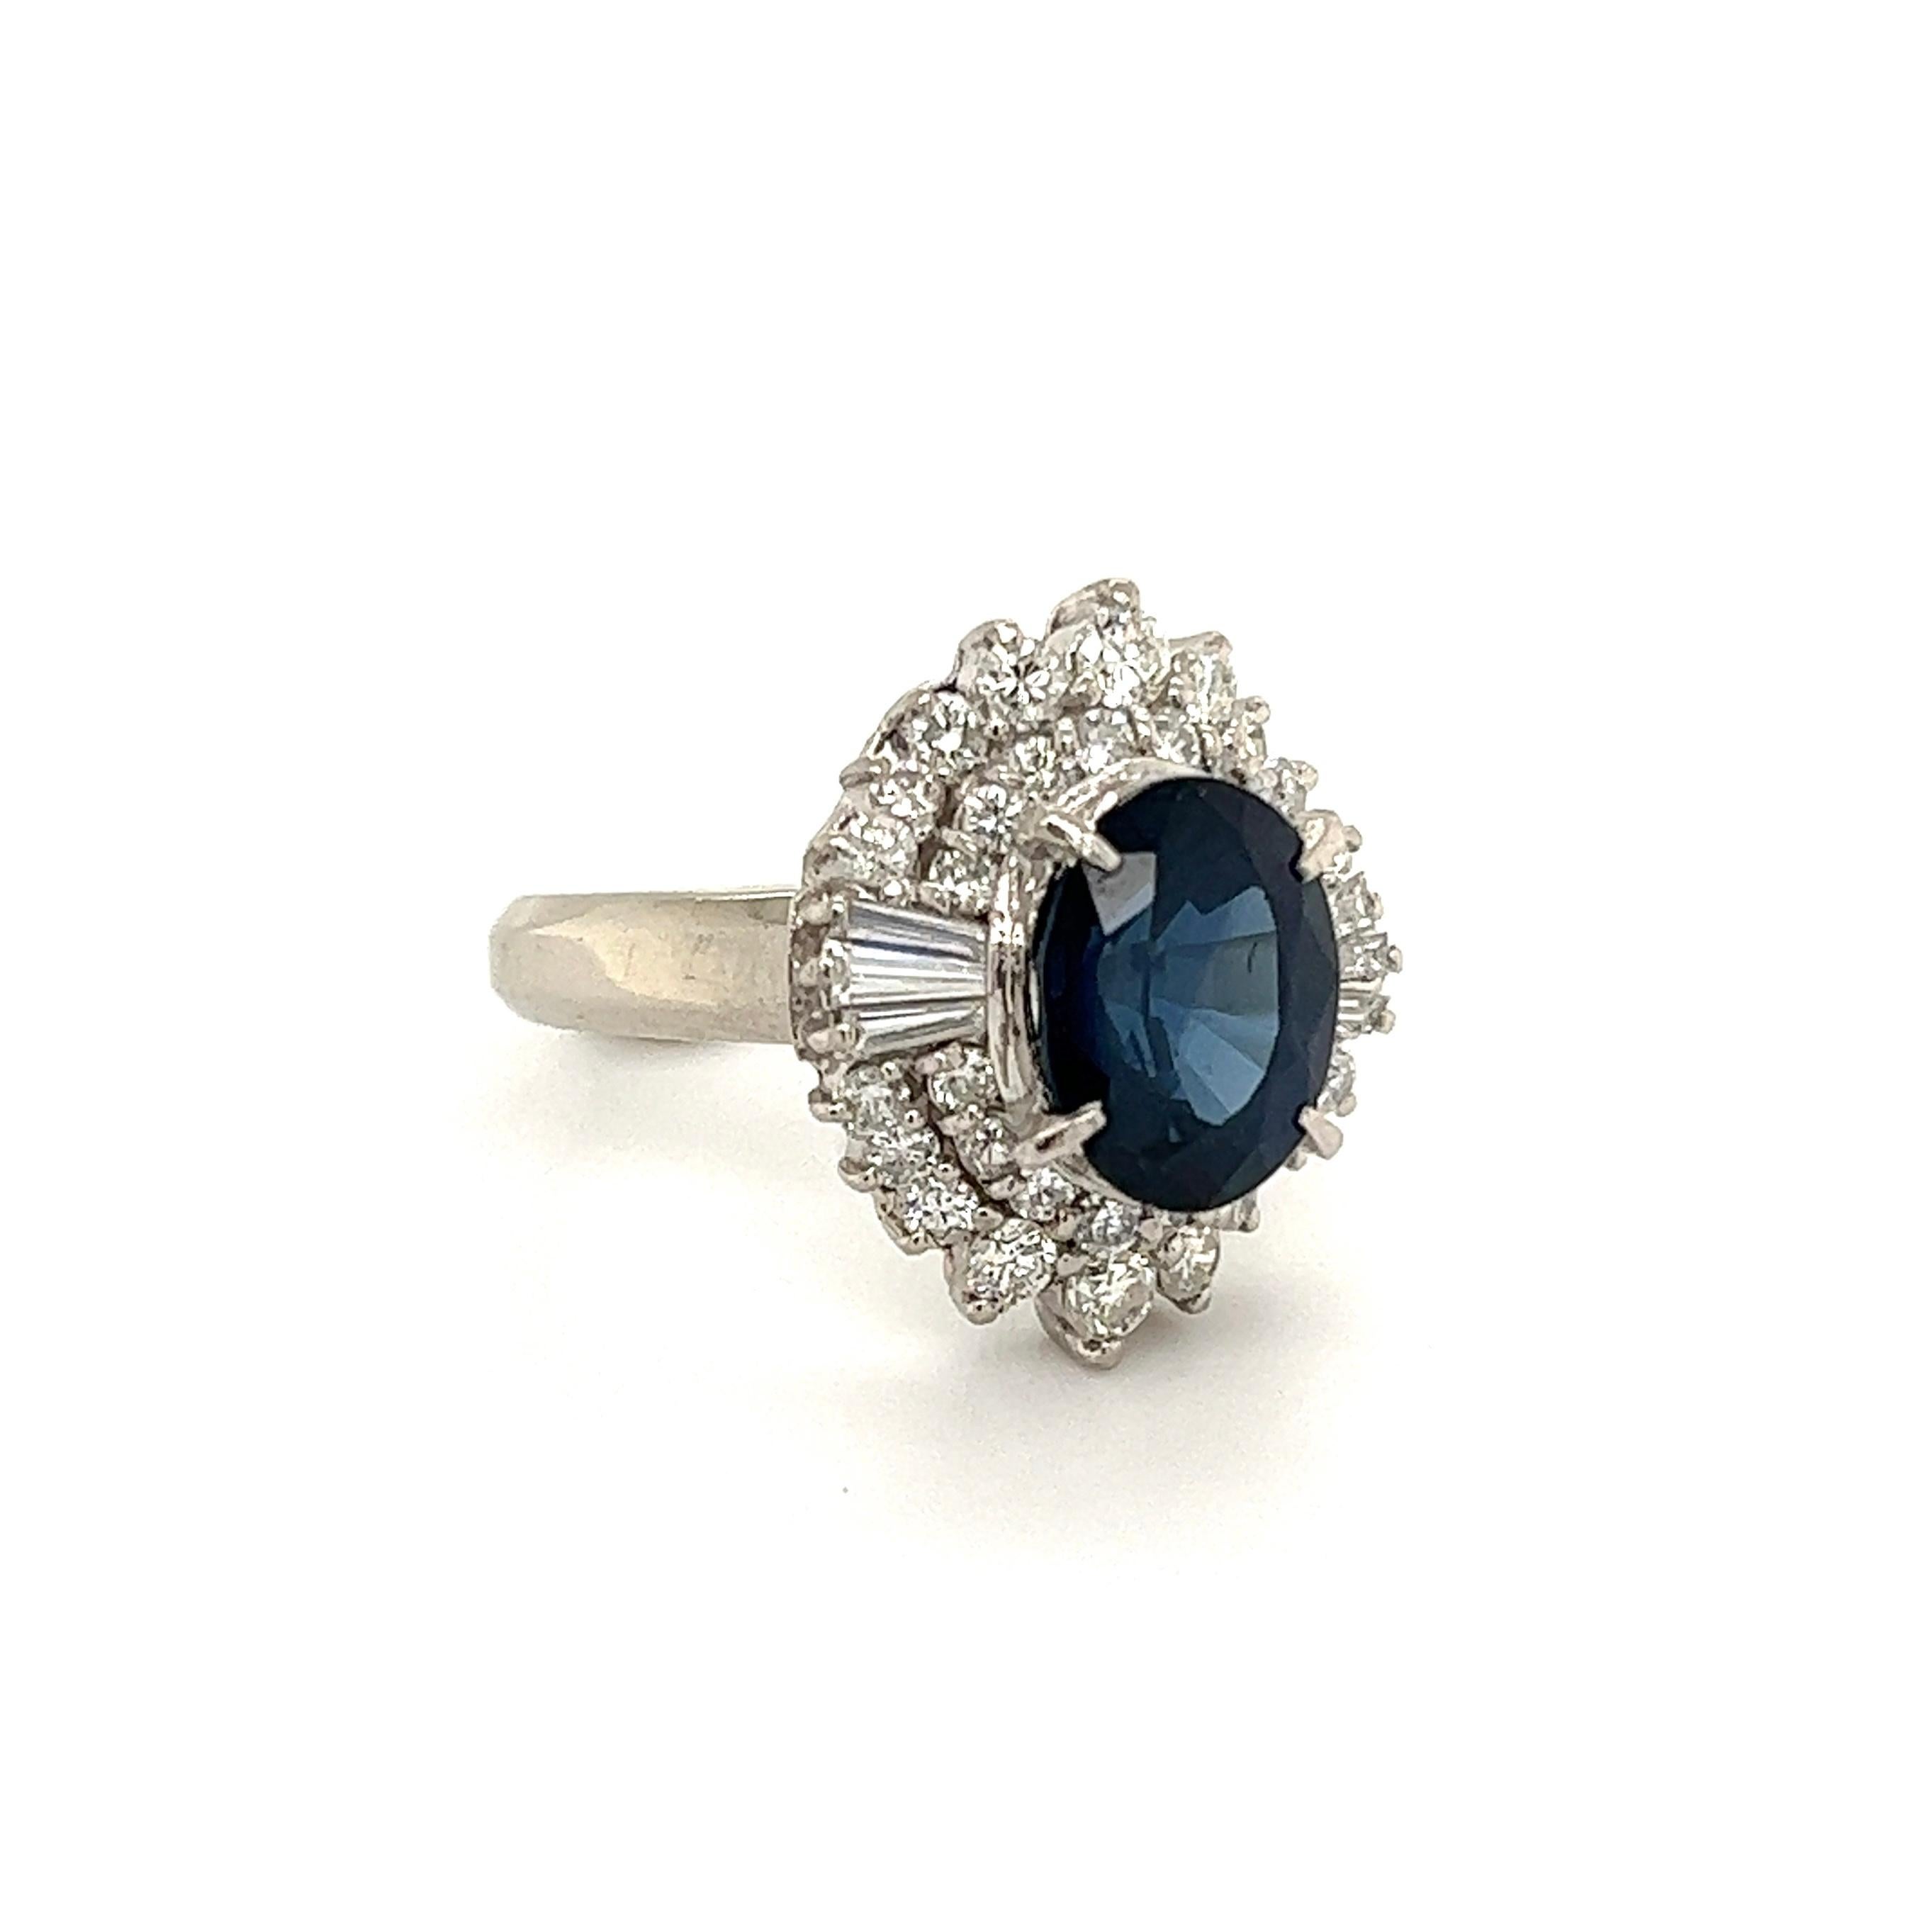 Simply Beautiful! Blue Sapphire and Diamond Art Deco Revival Platinum Ring. Centering a securely set Oval Sapphire, weighing approx. 3.34 Carat, surrounded by Diamonds, weighing approx. 1.00tcw. Hand crafted Platinum mounting. Approx. Dimensions: